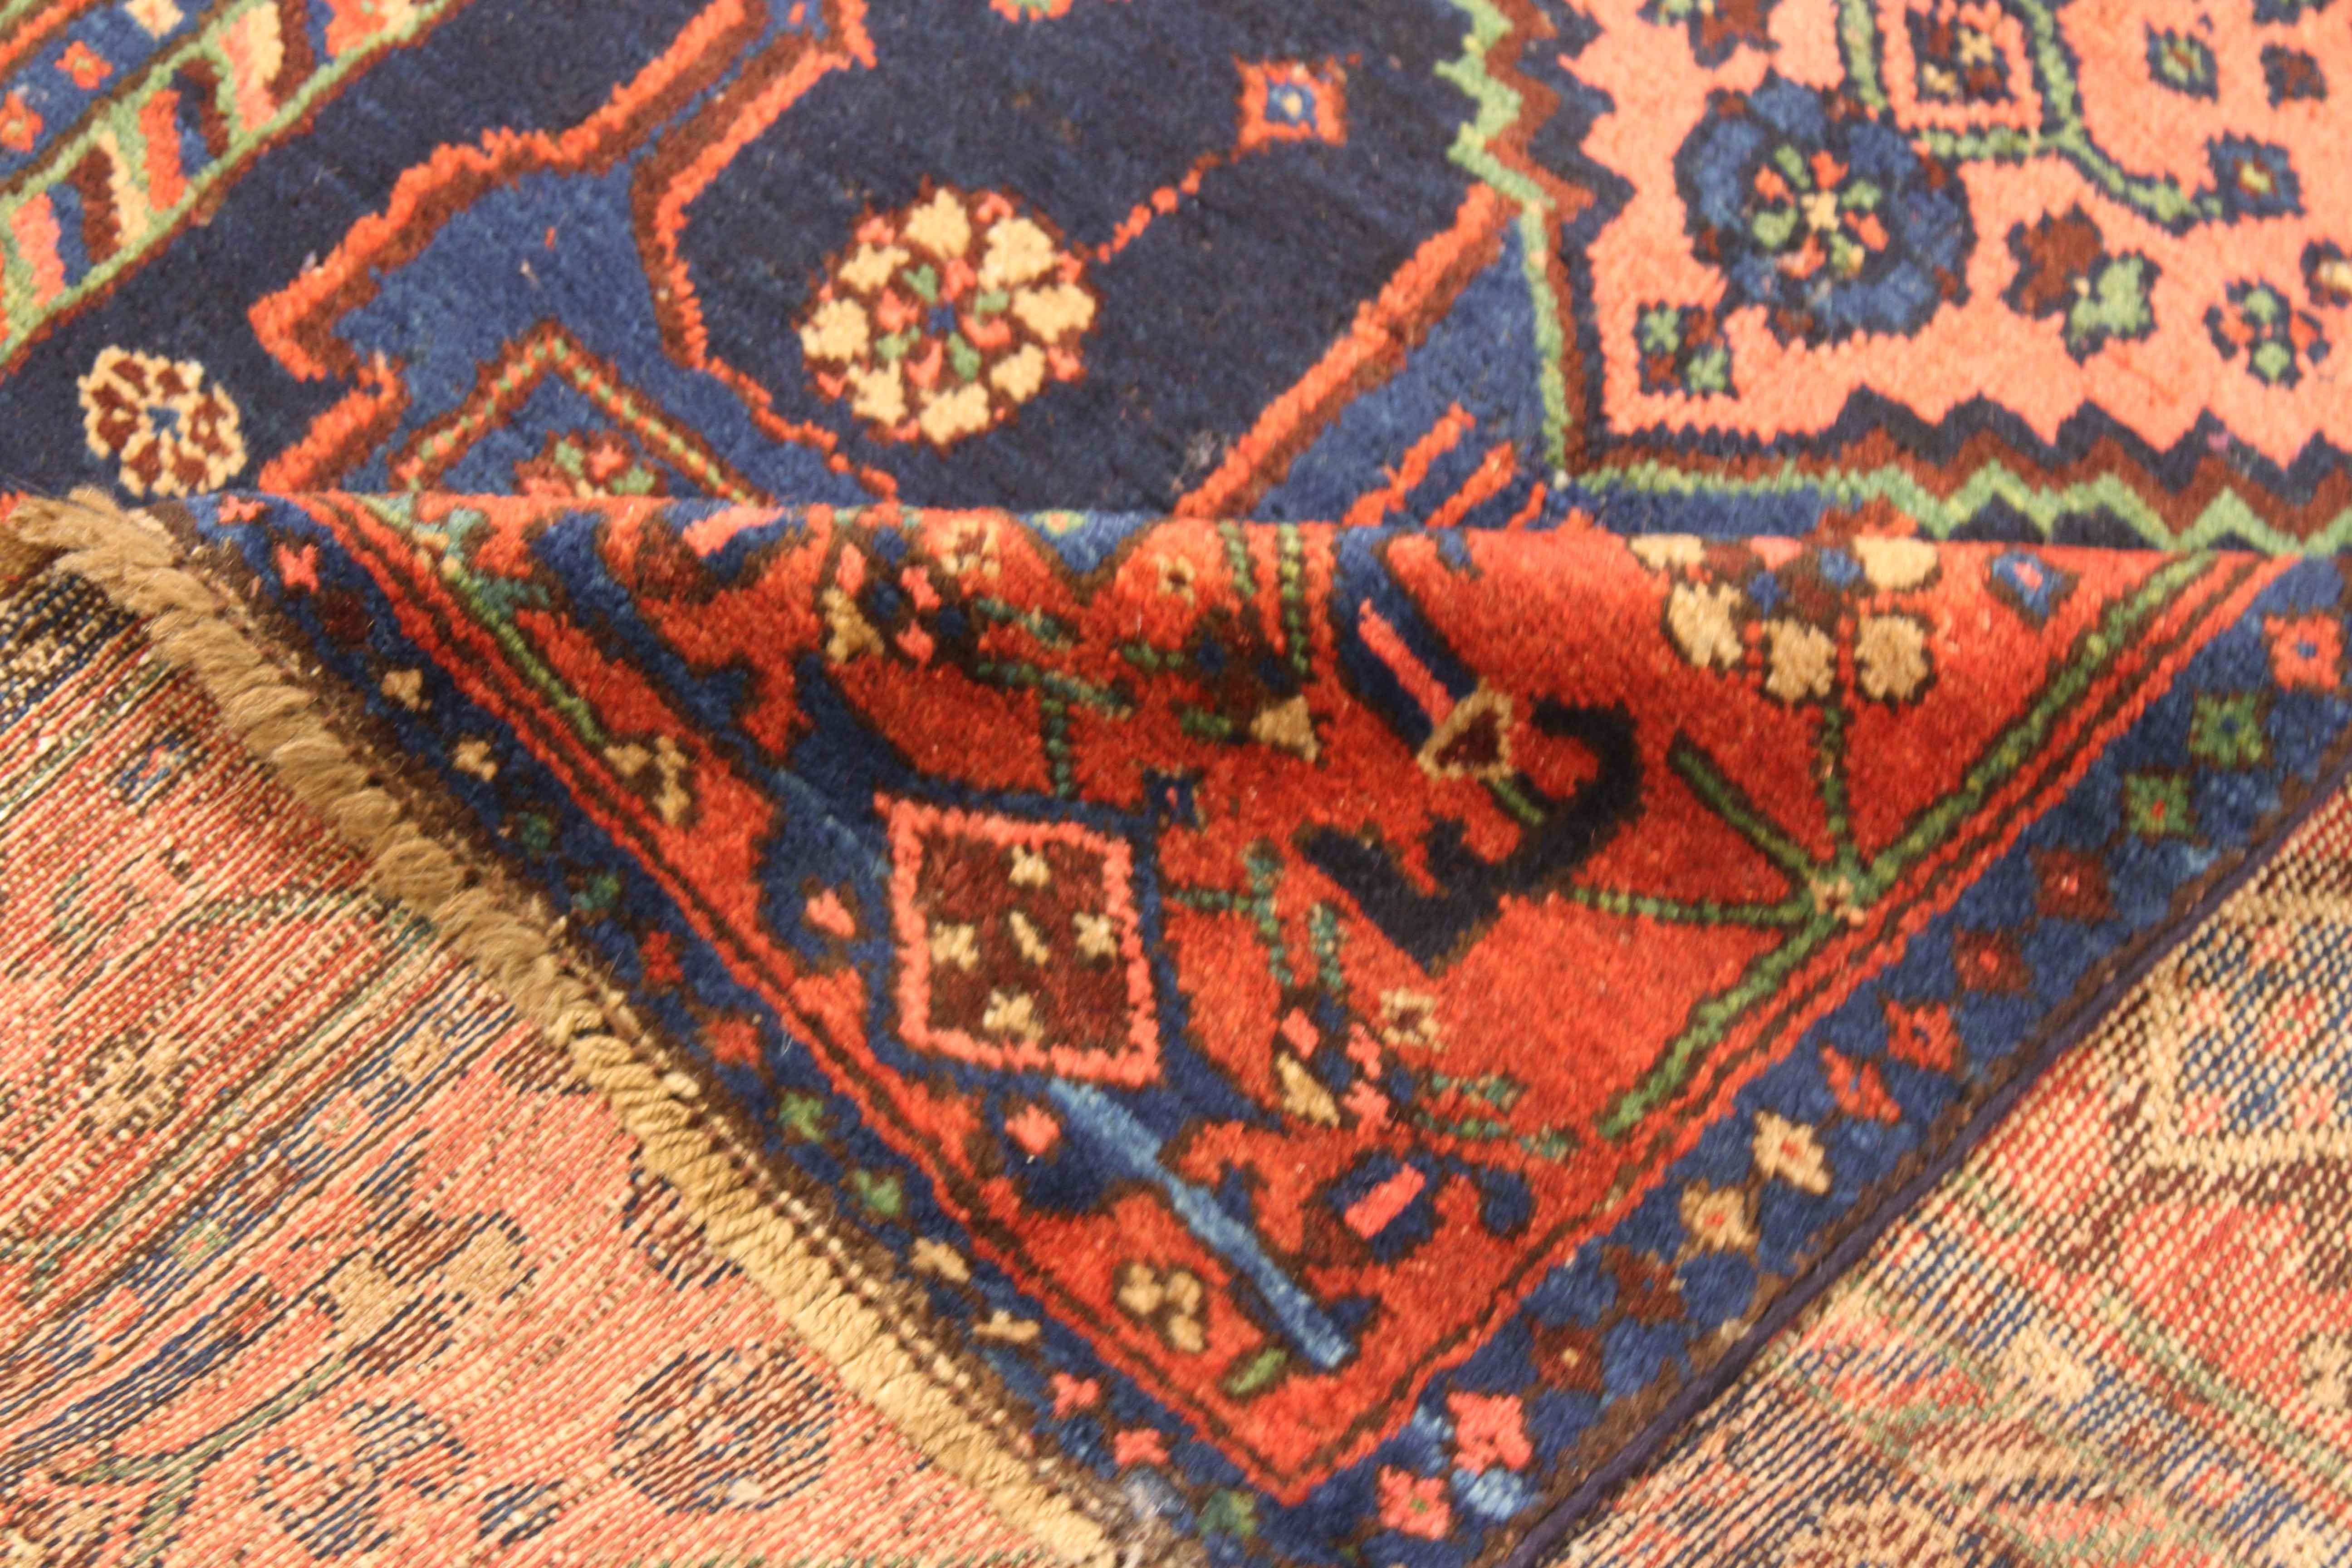 Antique Persian rug handwoven from the finest sheep’s wool and colored with all-natural vegetable dyes that are safe for humans and pets. It’s a traditional Hamedan design featuring a bold mix of red, blue and beige. It has a unique set of ‘anchor’